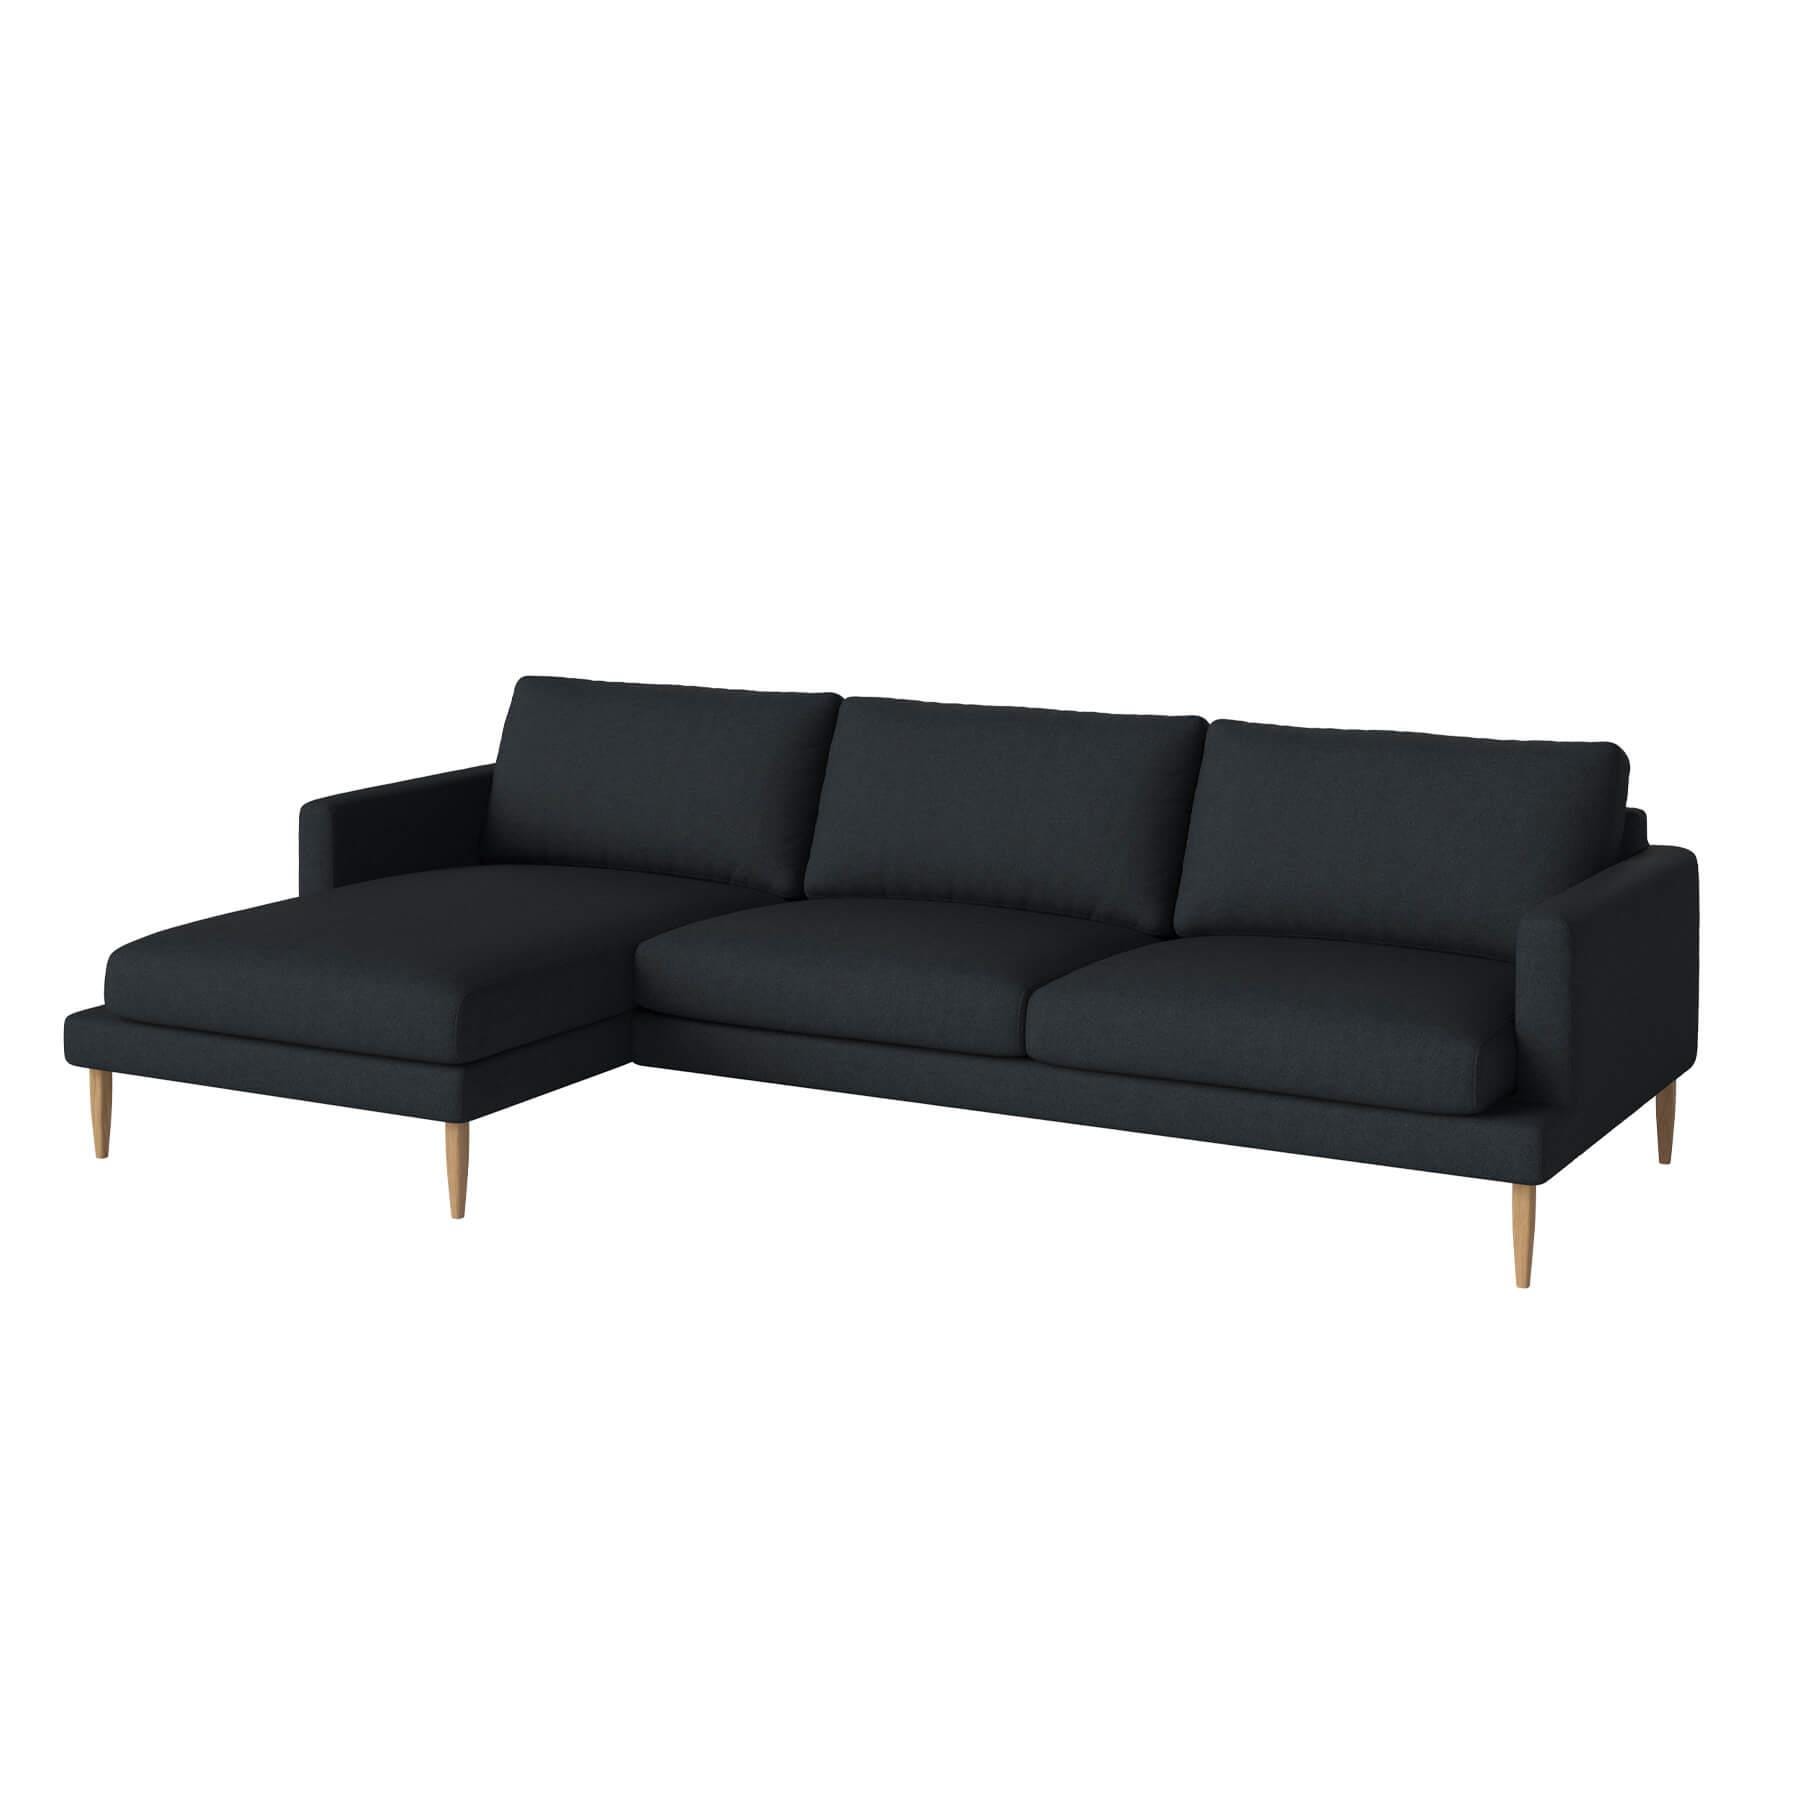 Bolia Veneda Sofa 35 Seater Sofa With Chaise Longue Oiled Oak Qual Navy Left Blue Designer Furniture From Holloways Of Ludlow